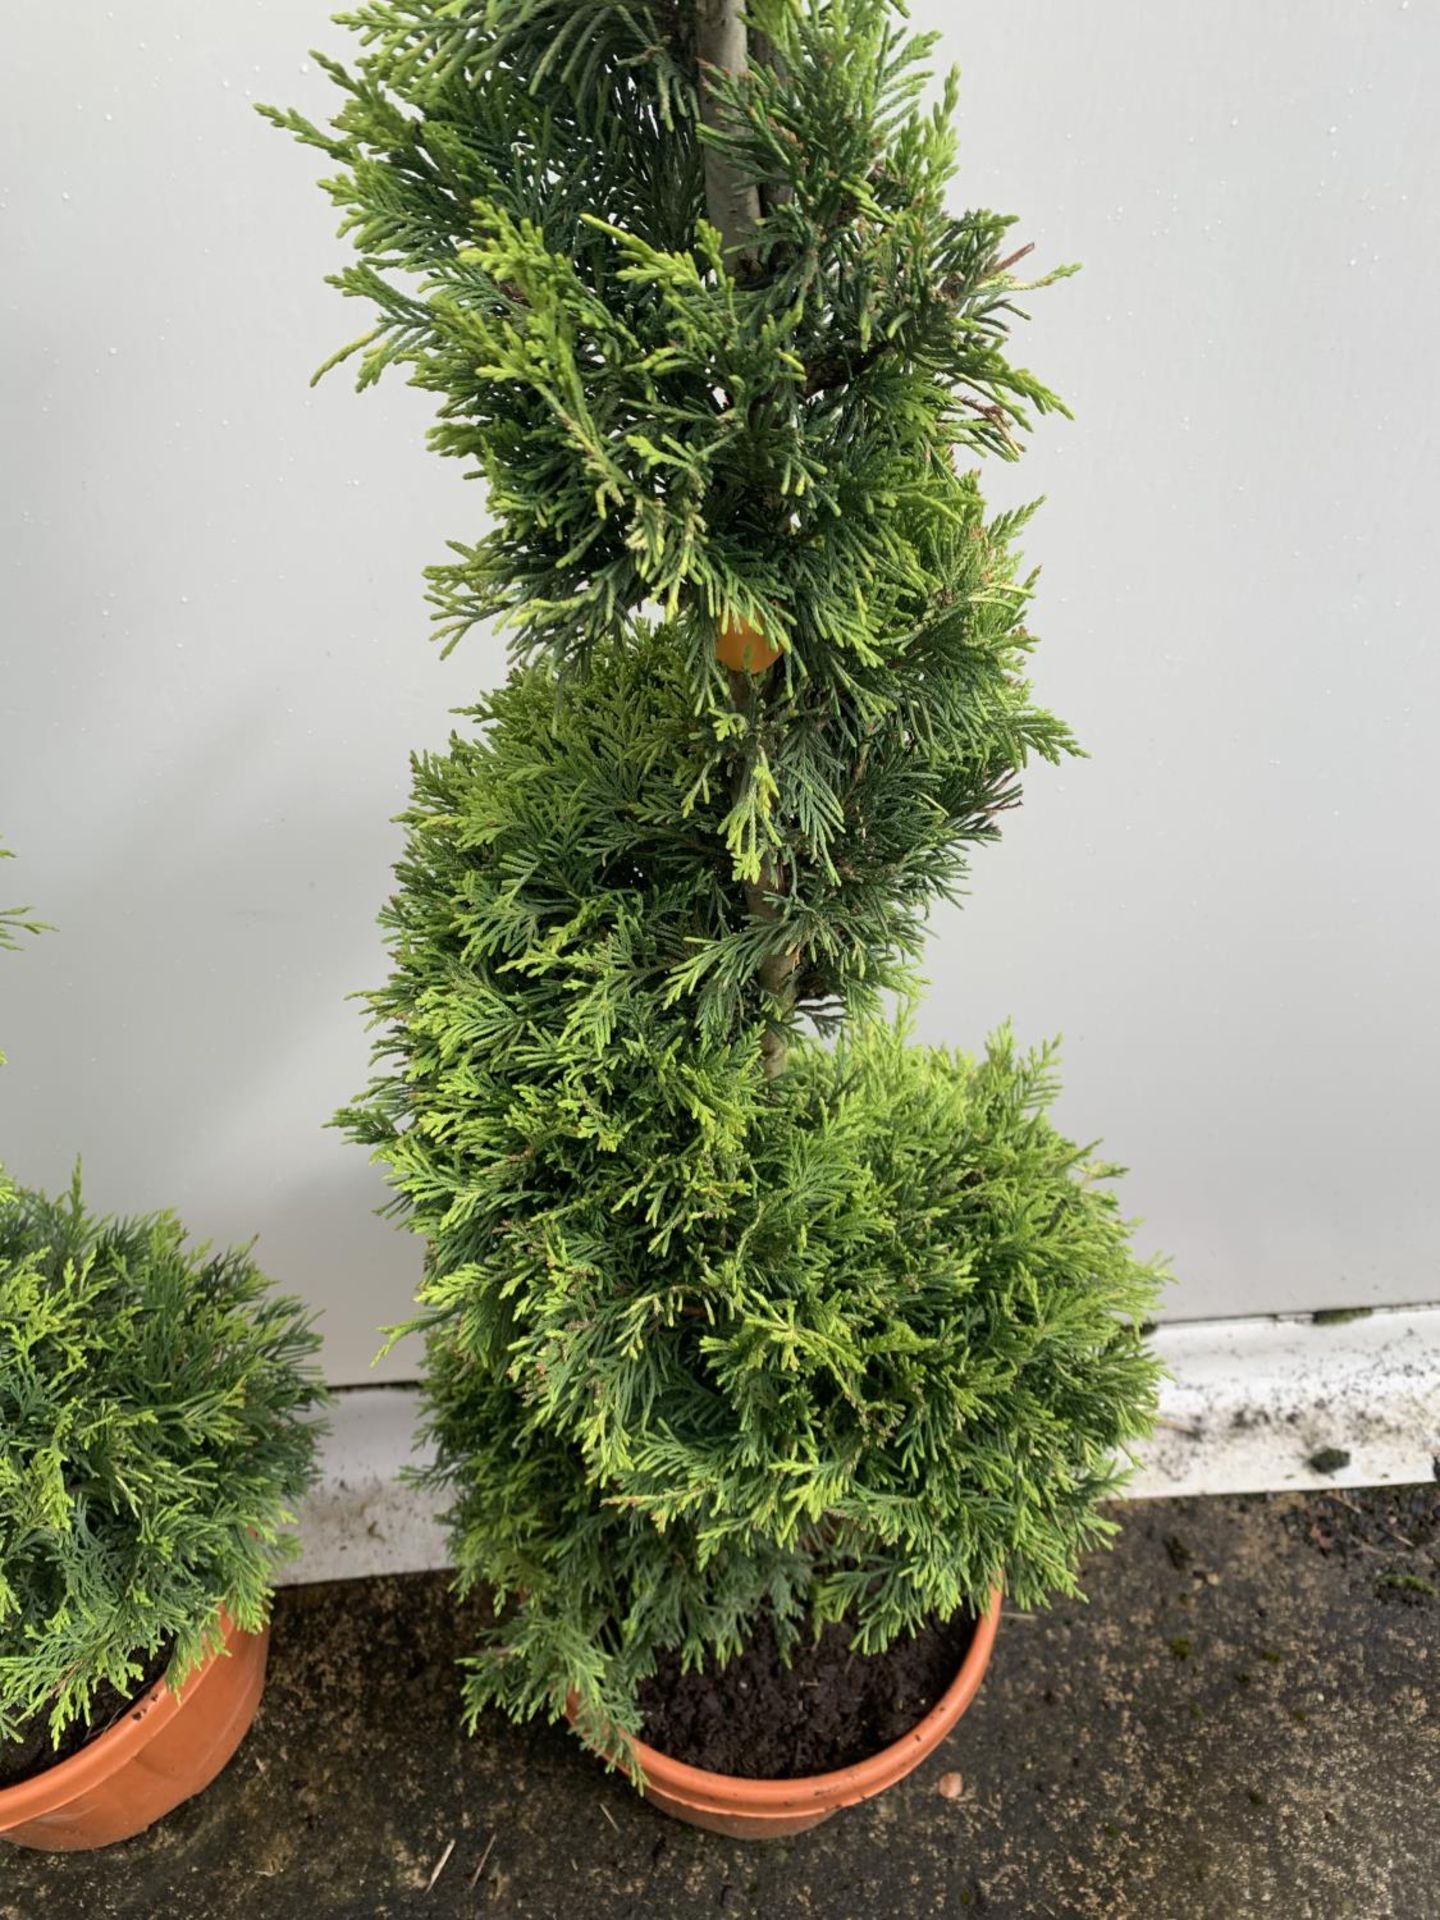 TWO SPIRAL CUPRESSOCYPARIS SPIRAL LEYANDII 'GOLD RIDER' APPROX 170CM IN HEIGHT IN 15 LTR POTS PLUS - Image 6 of 6